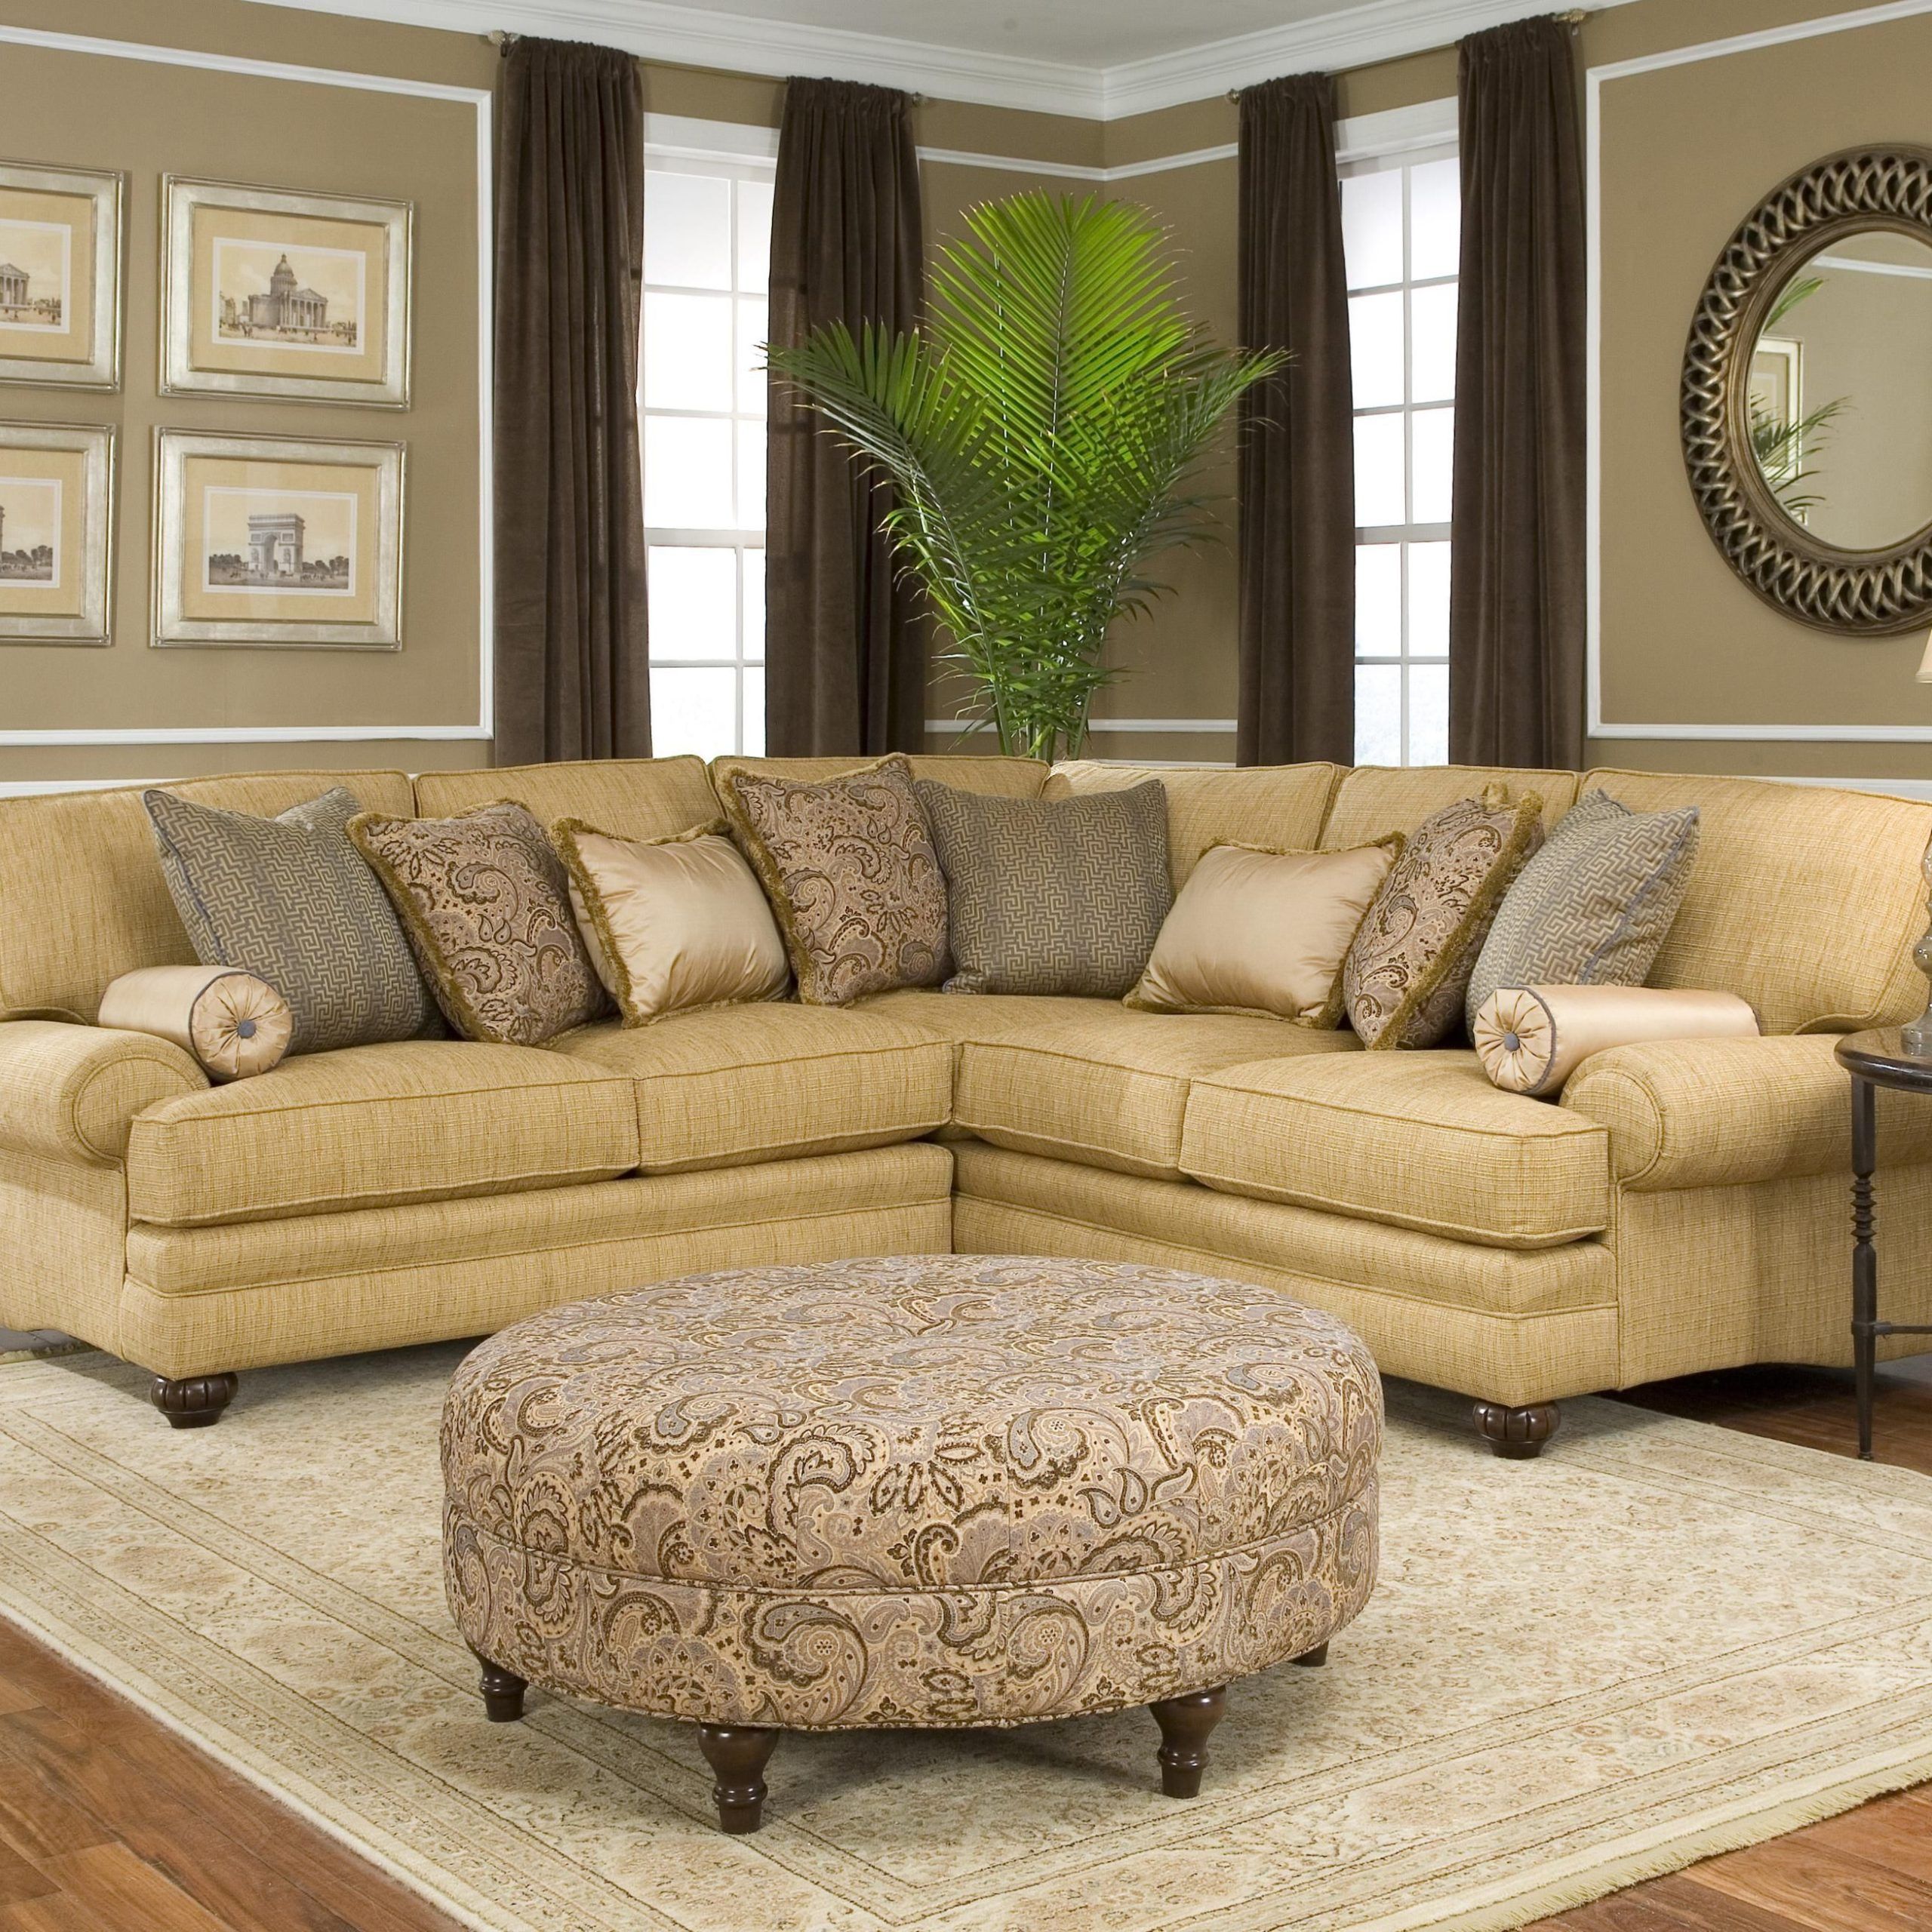 Popular 20 Top Traditional Sectional Sofas Living Room Furniture (View 4 of 15)